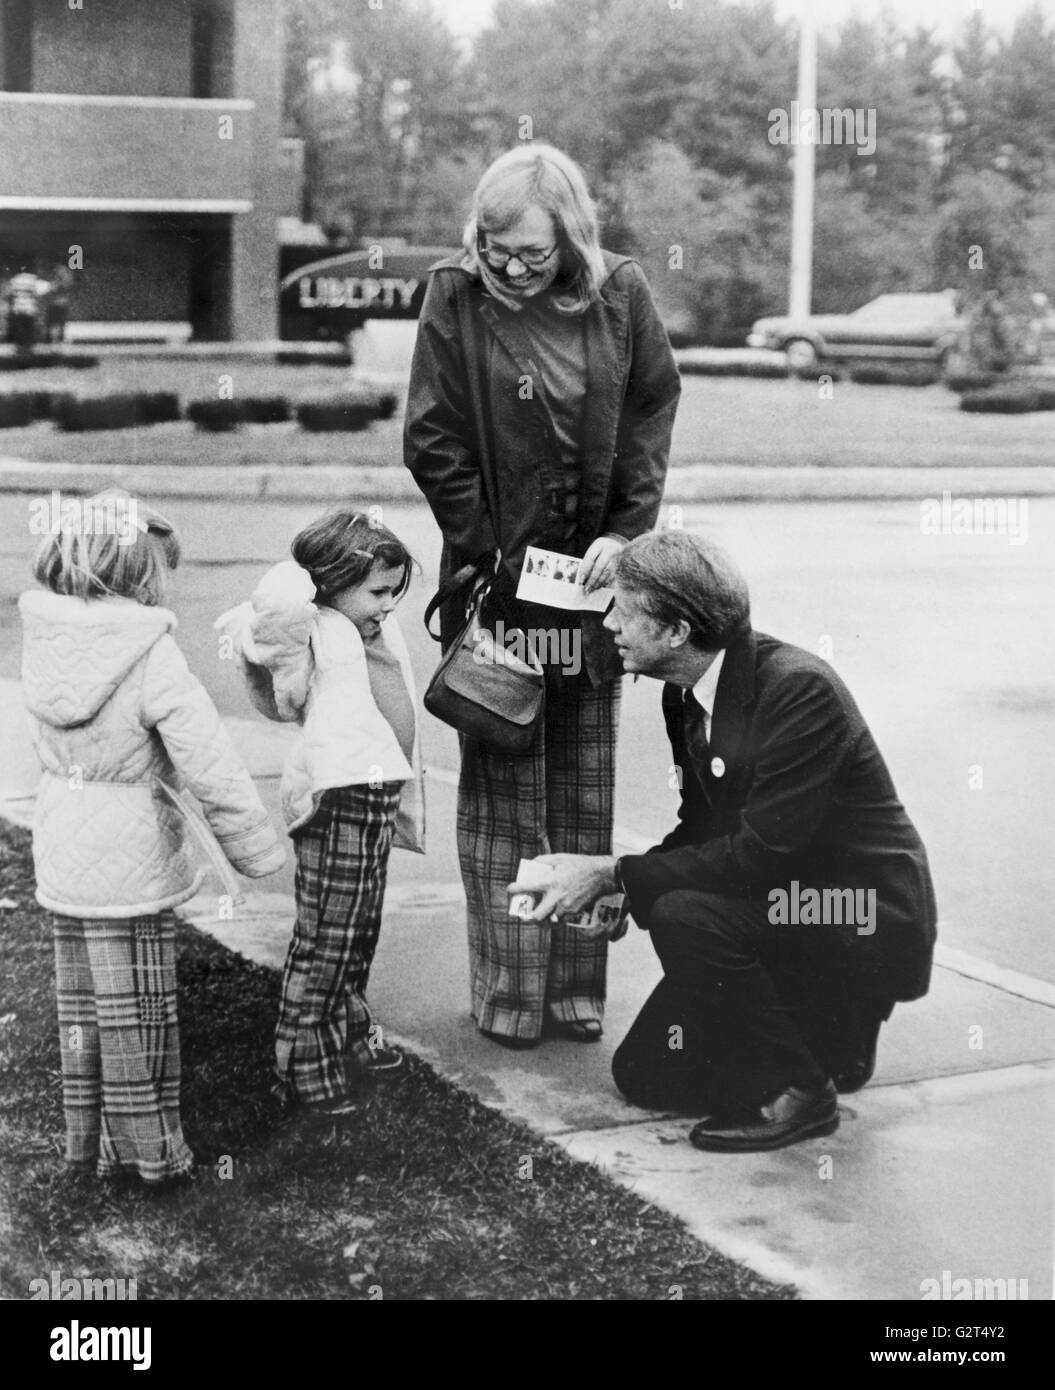 Candidate Jimmy Carter greeting a mother and two children while campaigning in 1976. Stock Photo